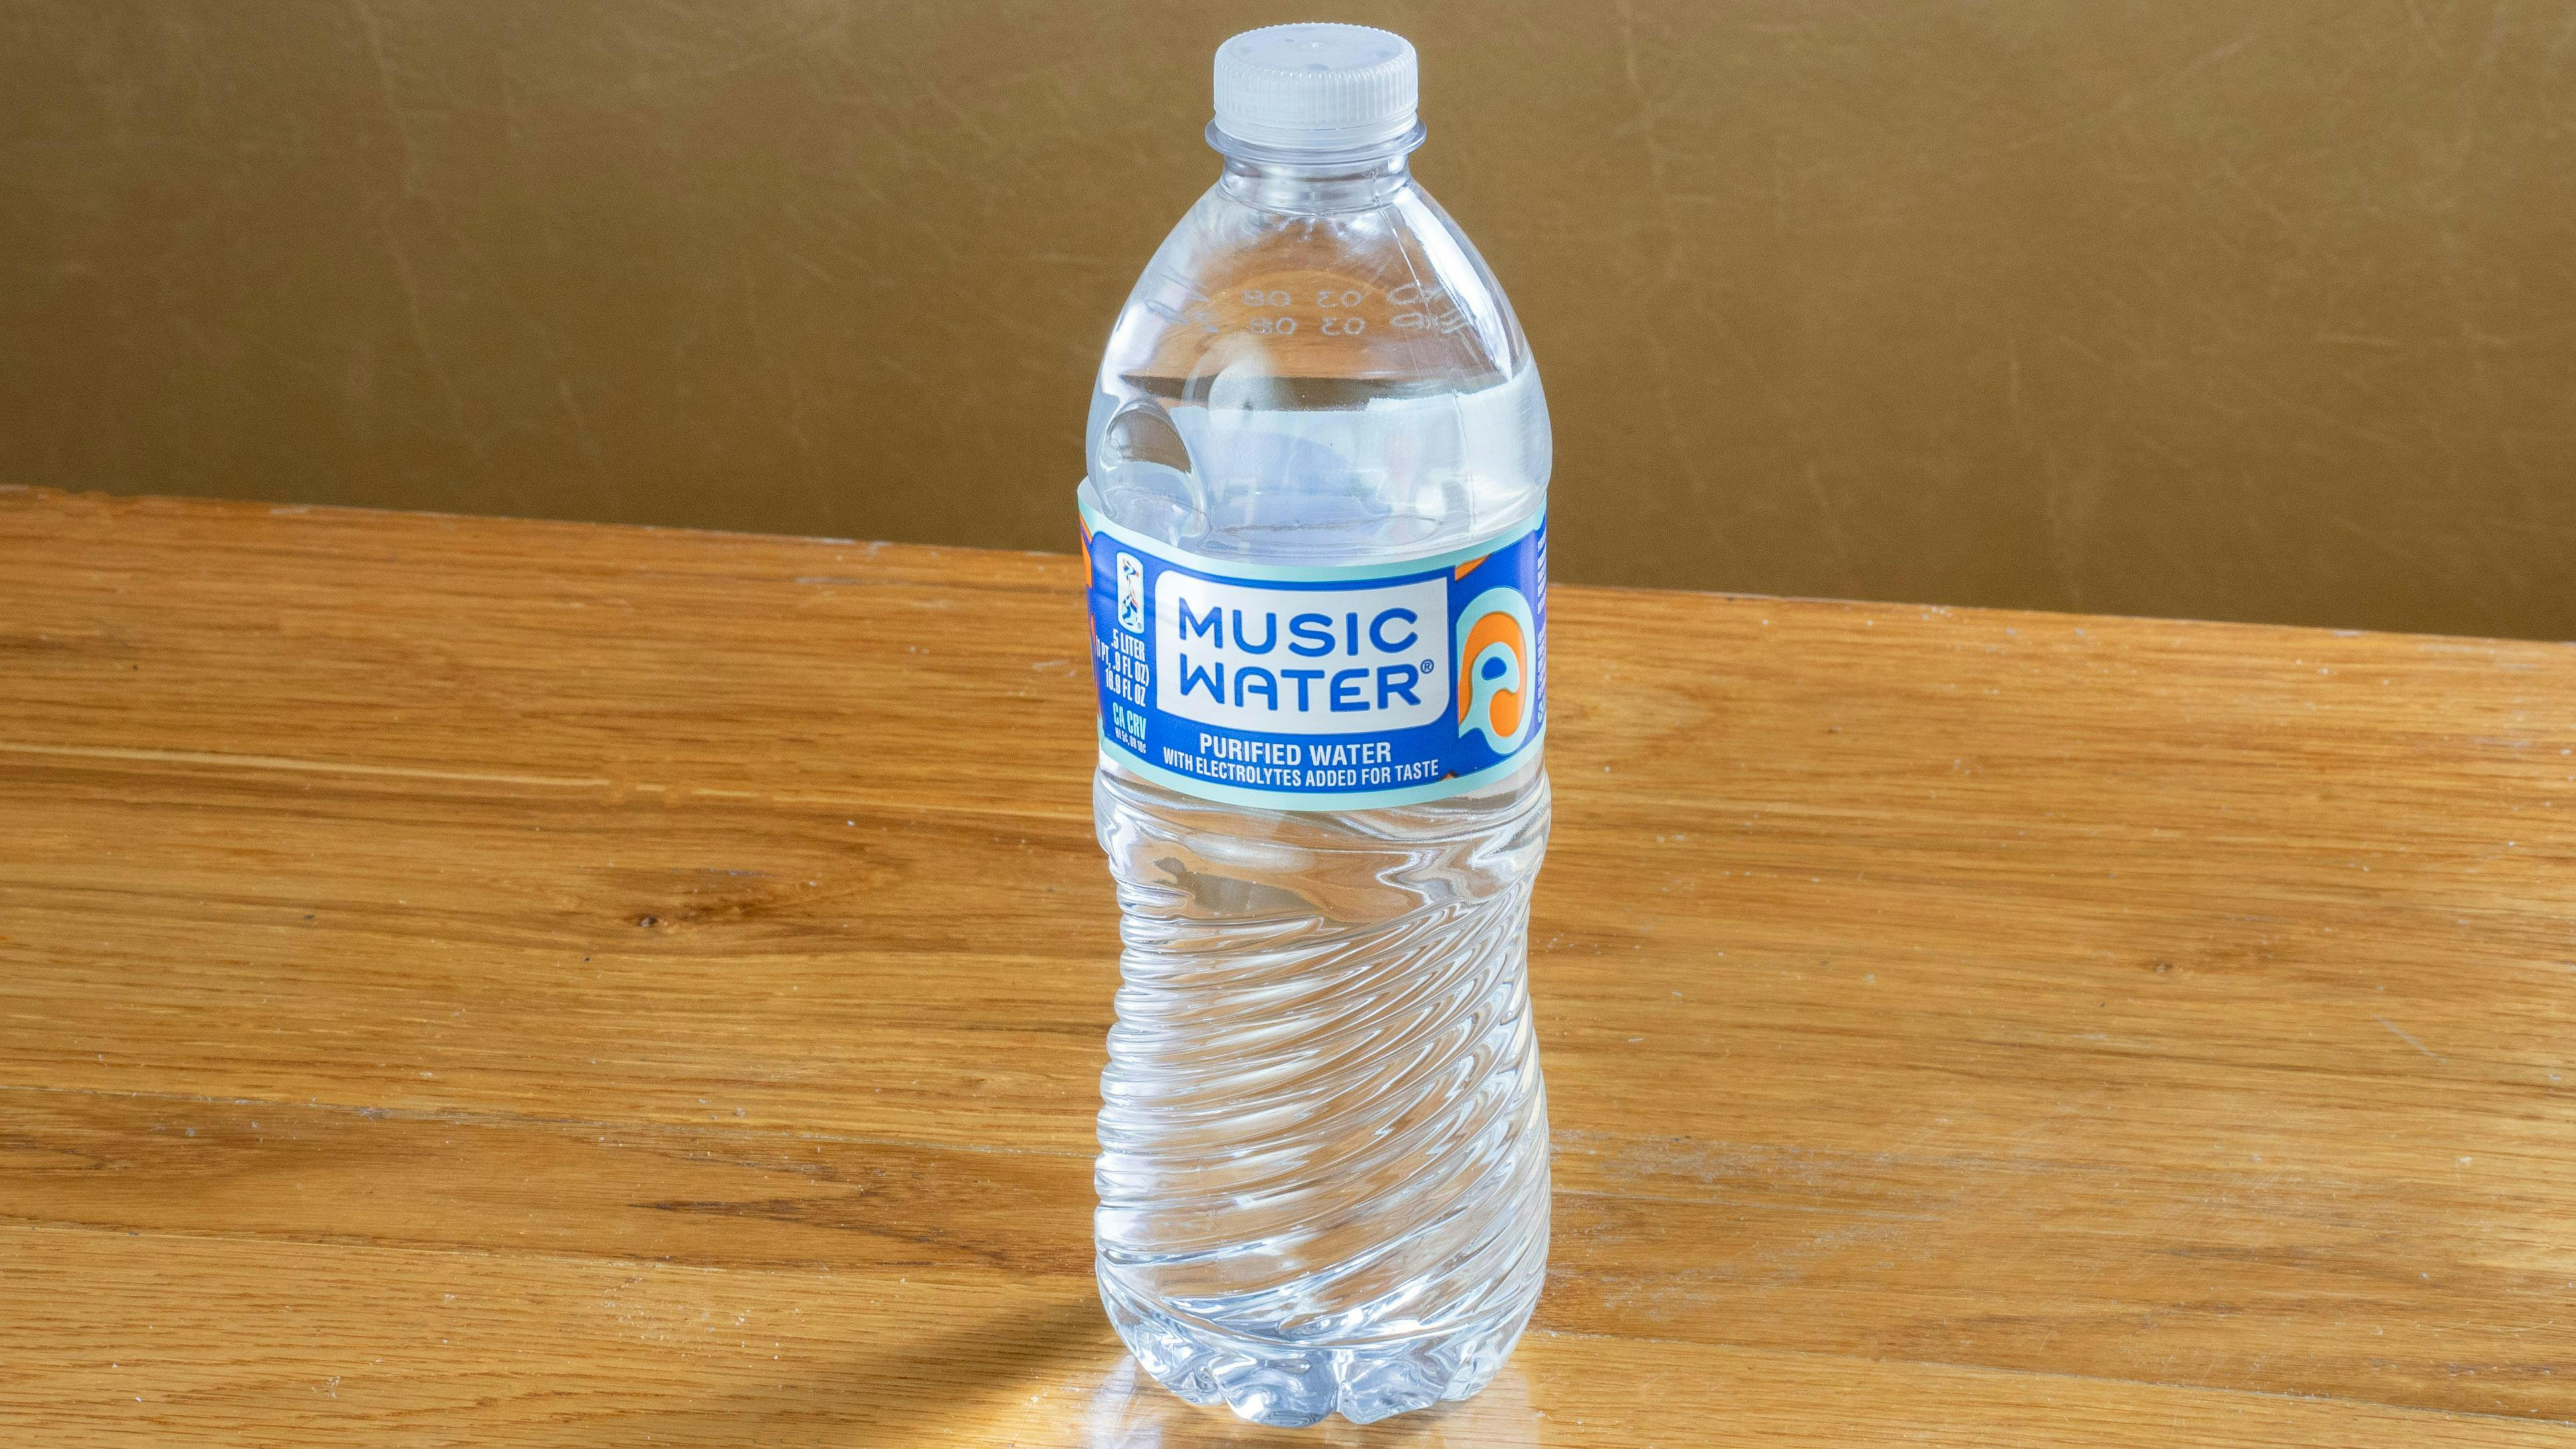 Bottled Water from Austin Hotdog Company - Research Blvd in Austin, TX